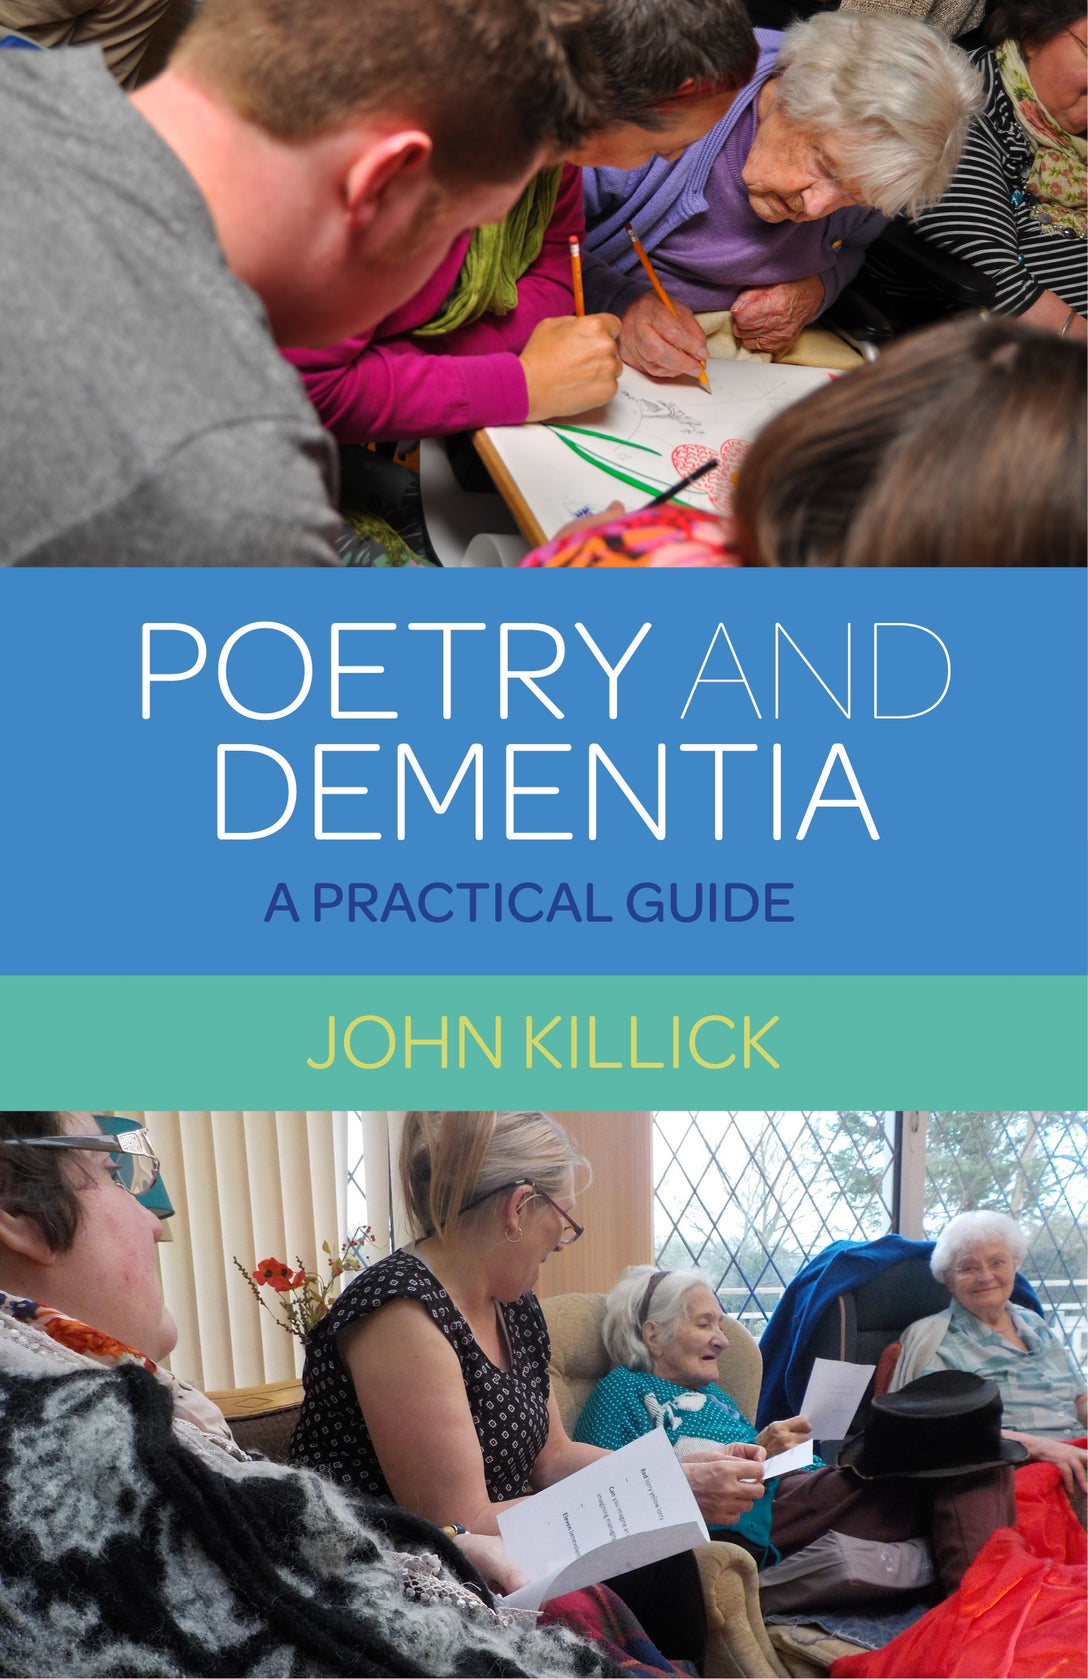 Poetry and Dementia by Mr John Killick